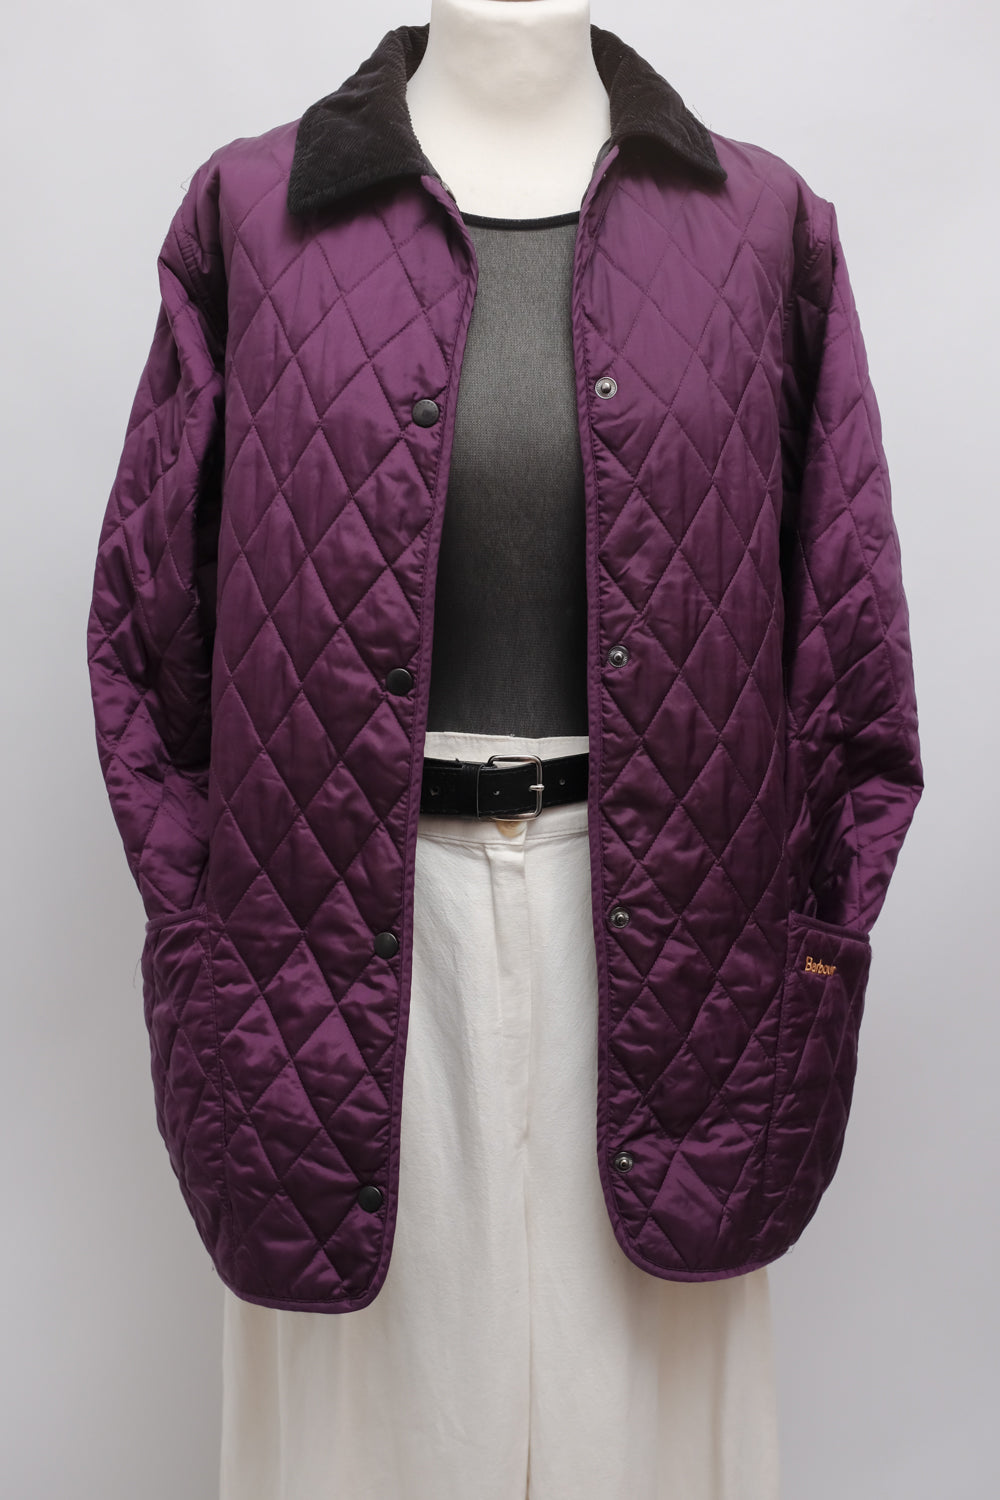 BARBOUR CLASSY PURPLE QUILTED JACKET